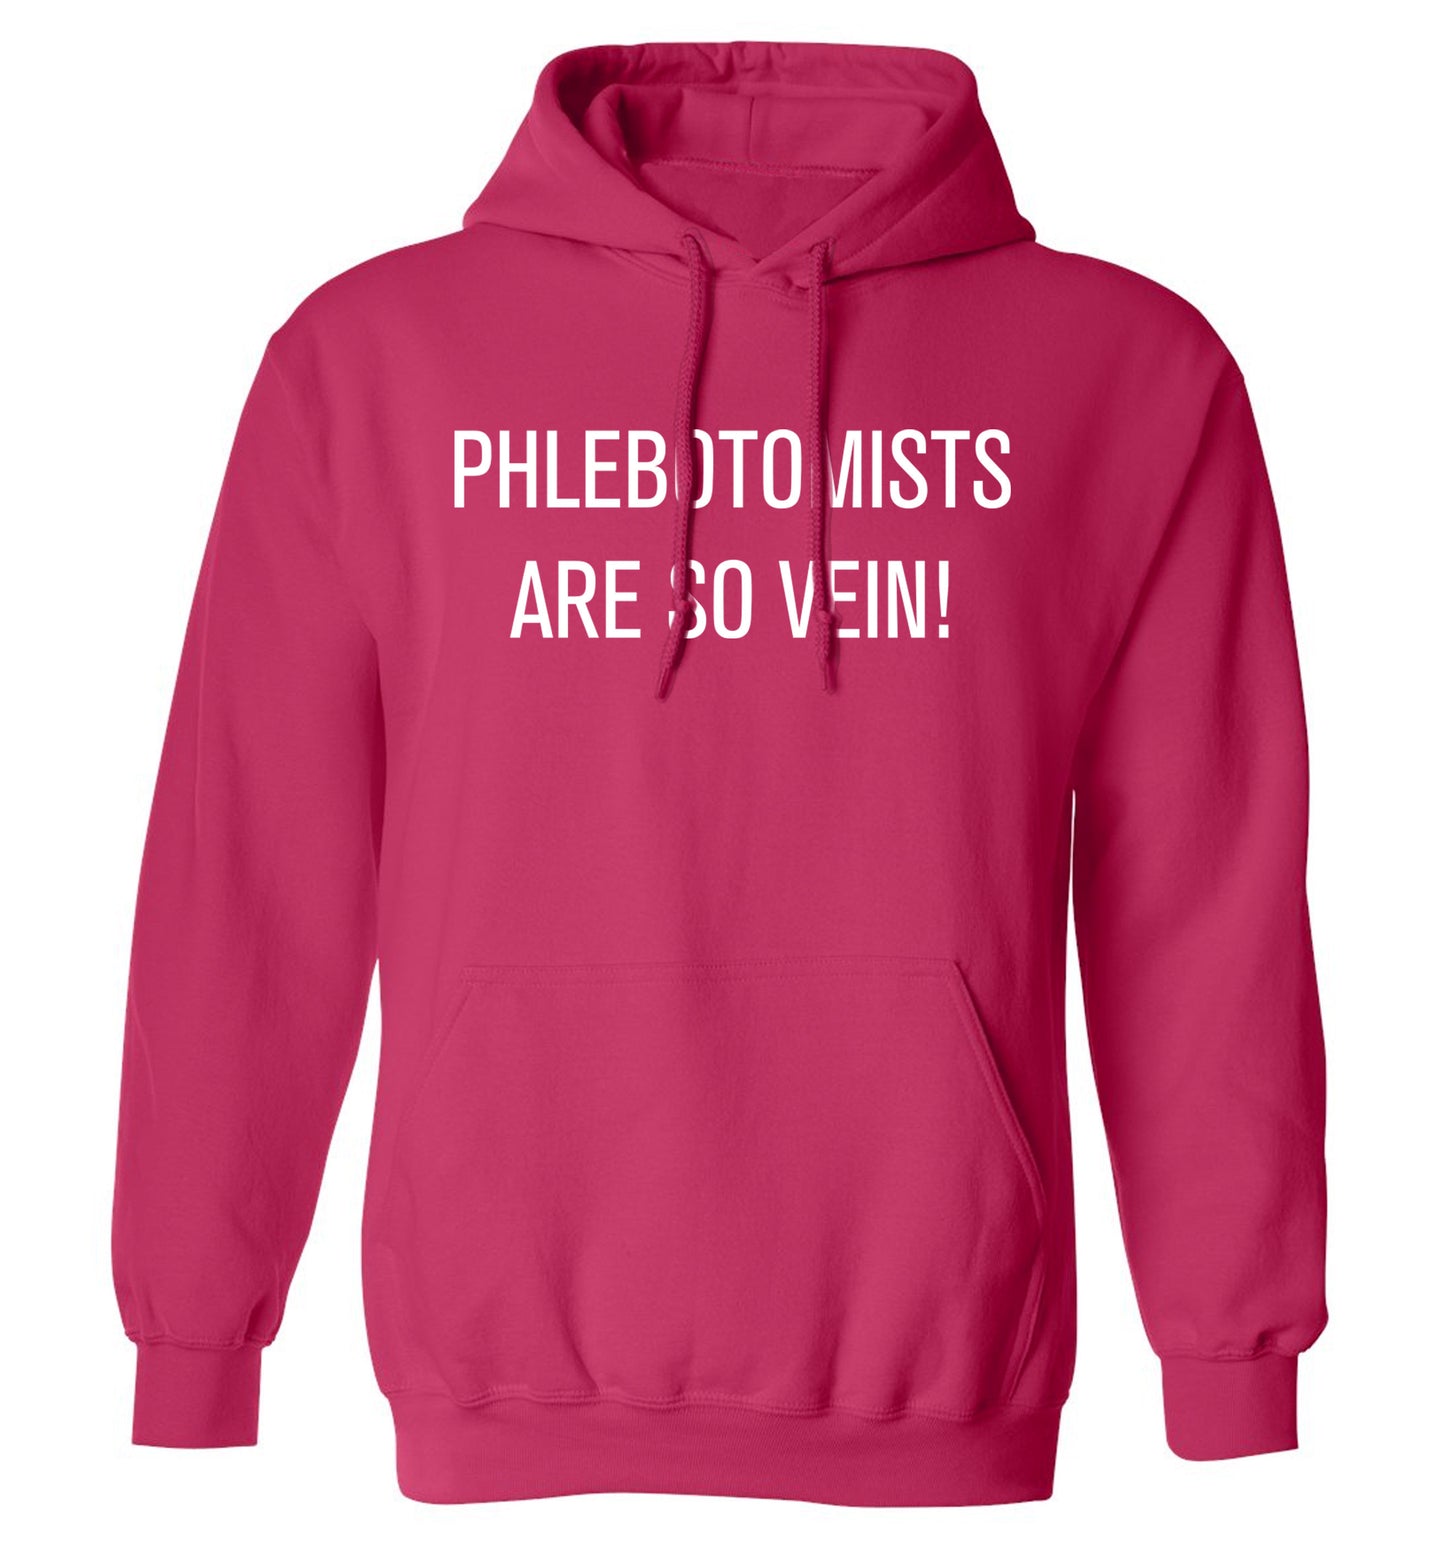 Phlebotomists are so vein! adults unisex pink hoodie 2XL